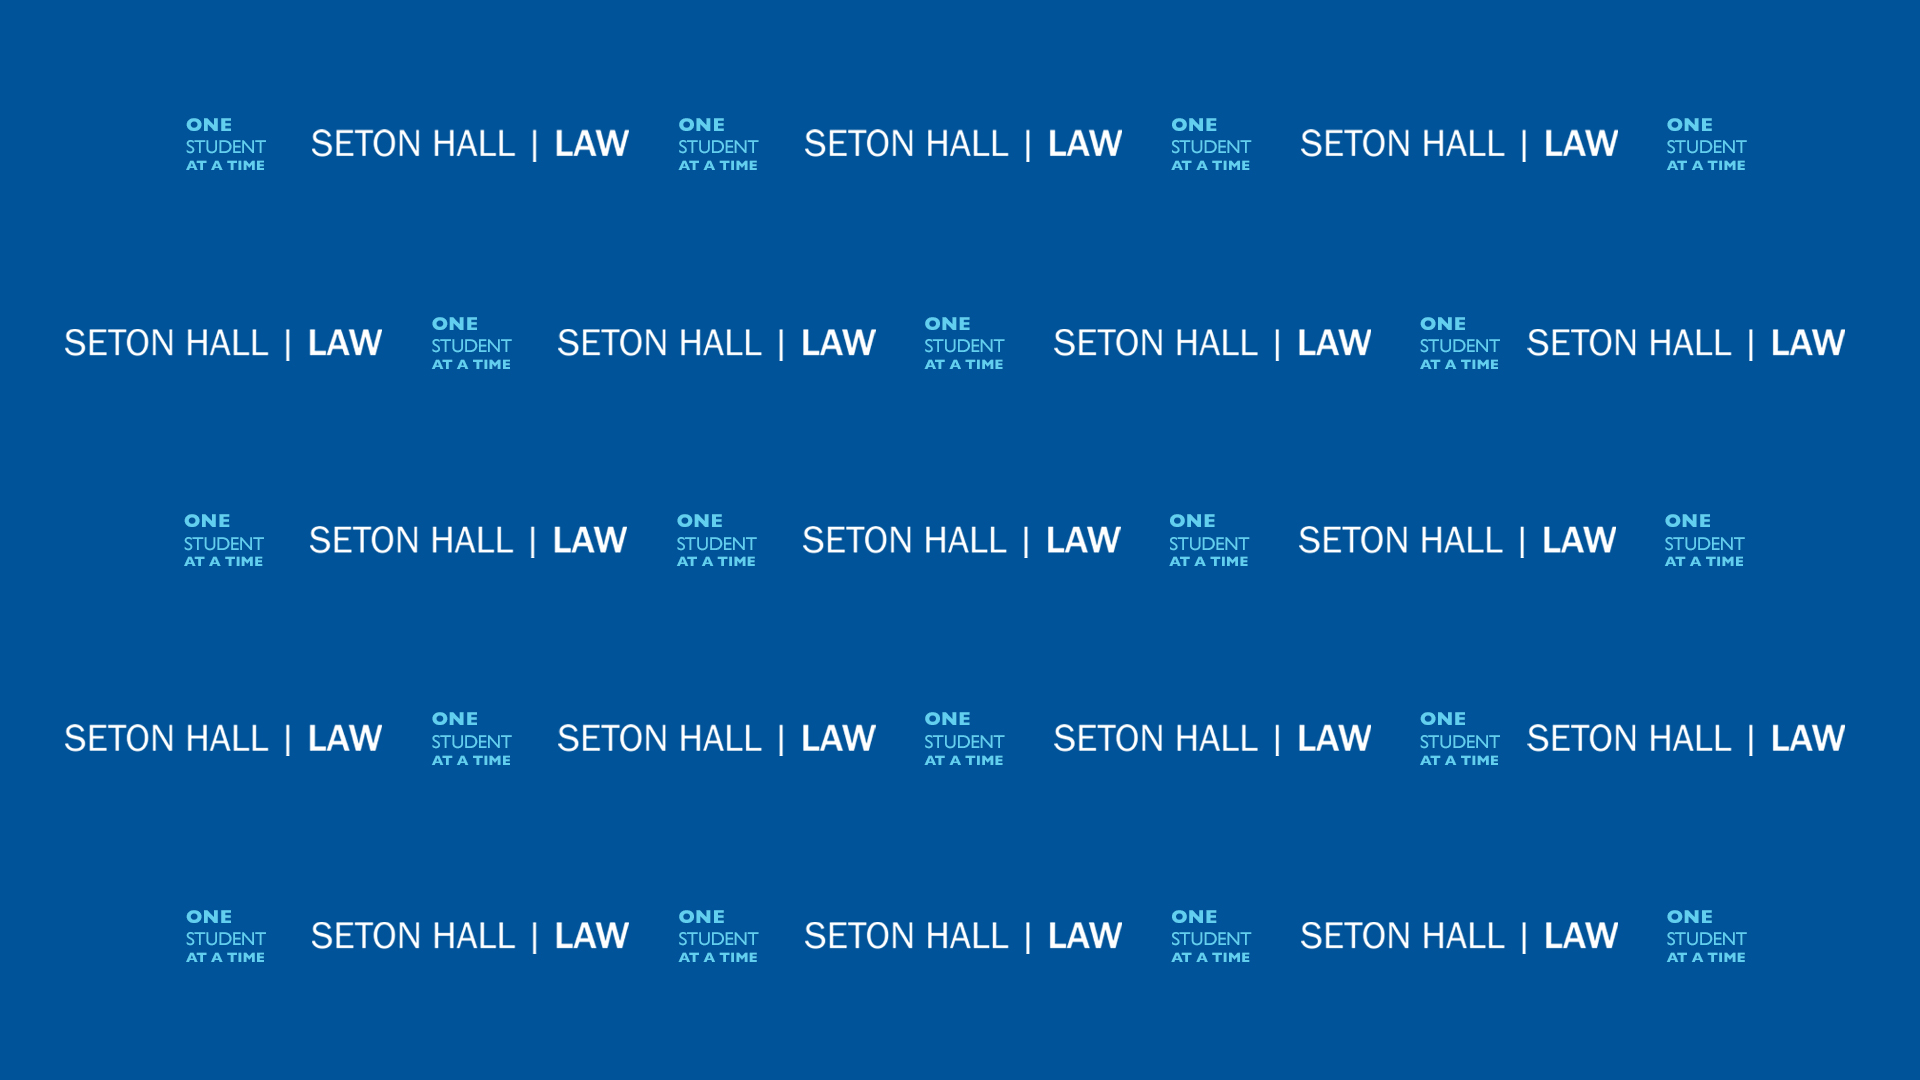 Law School Step and Repeat - 400x225px